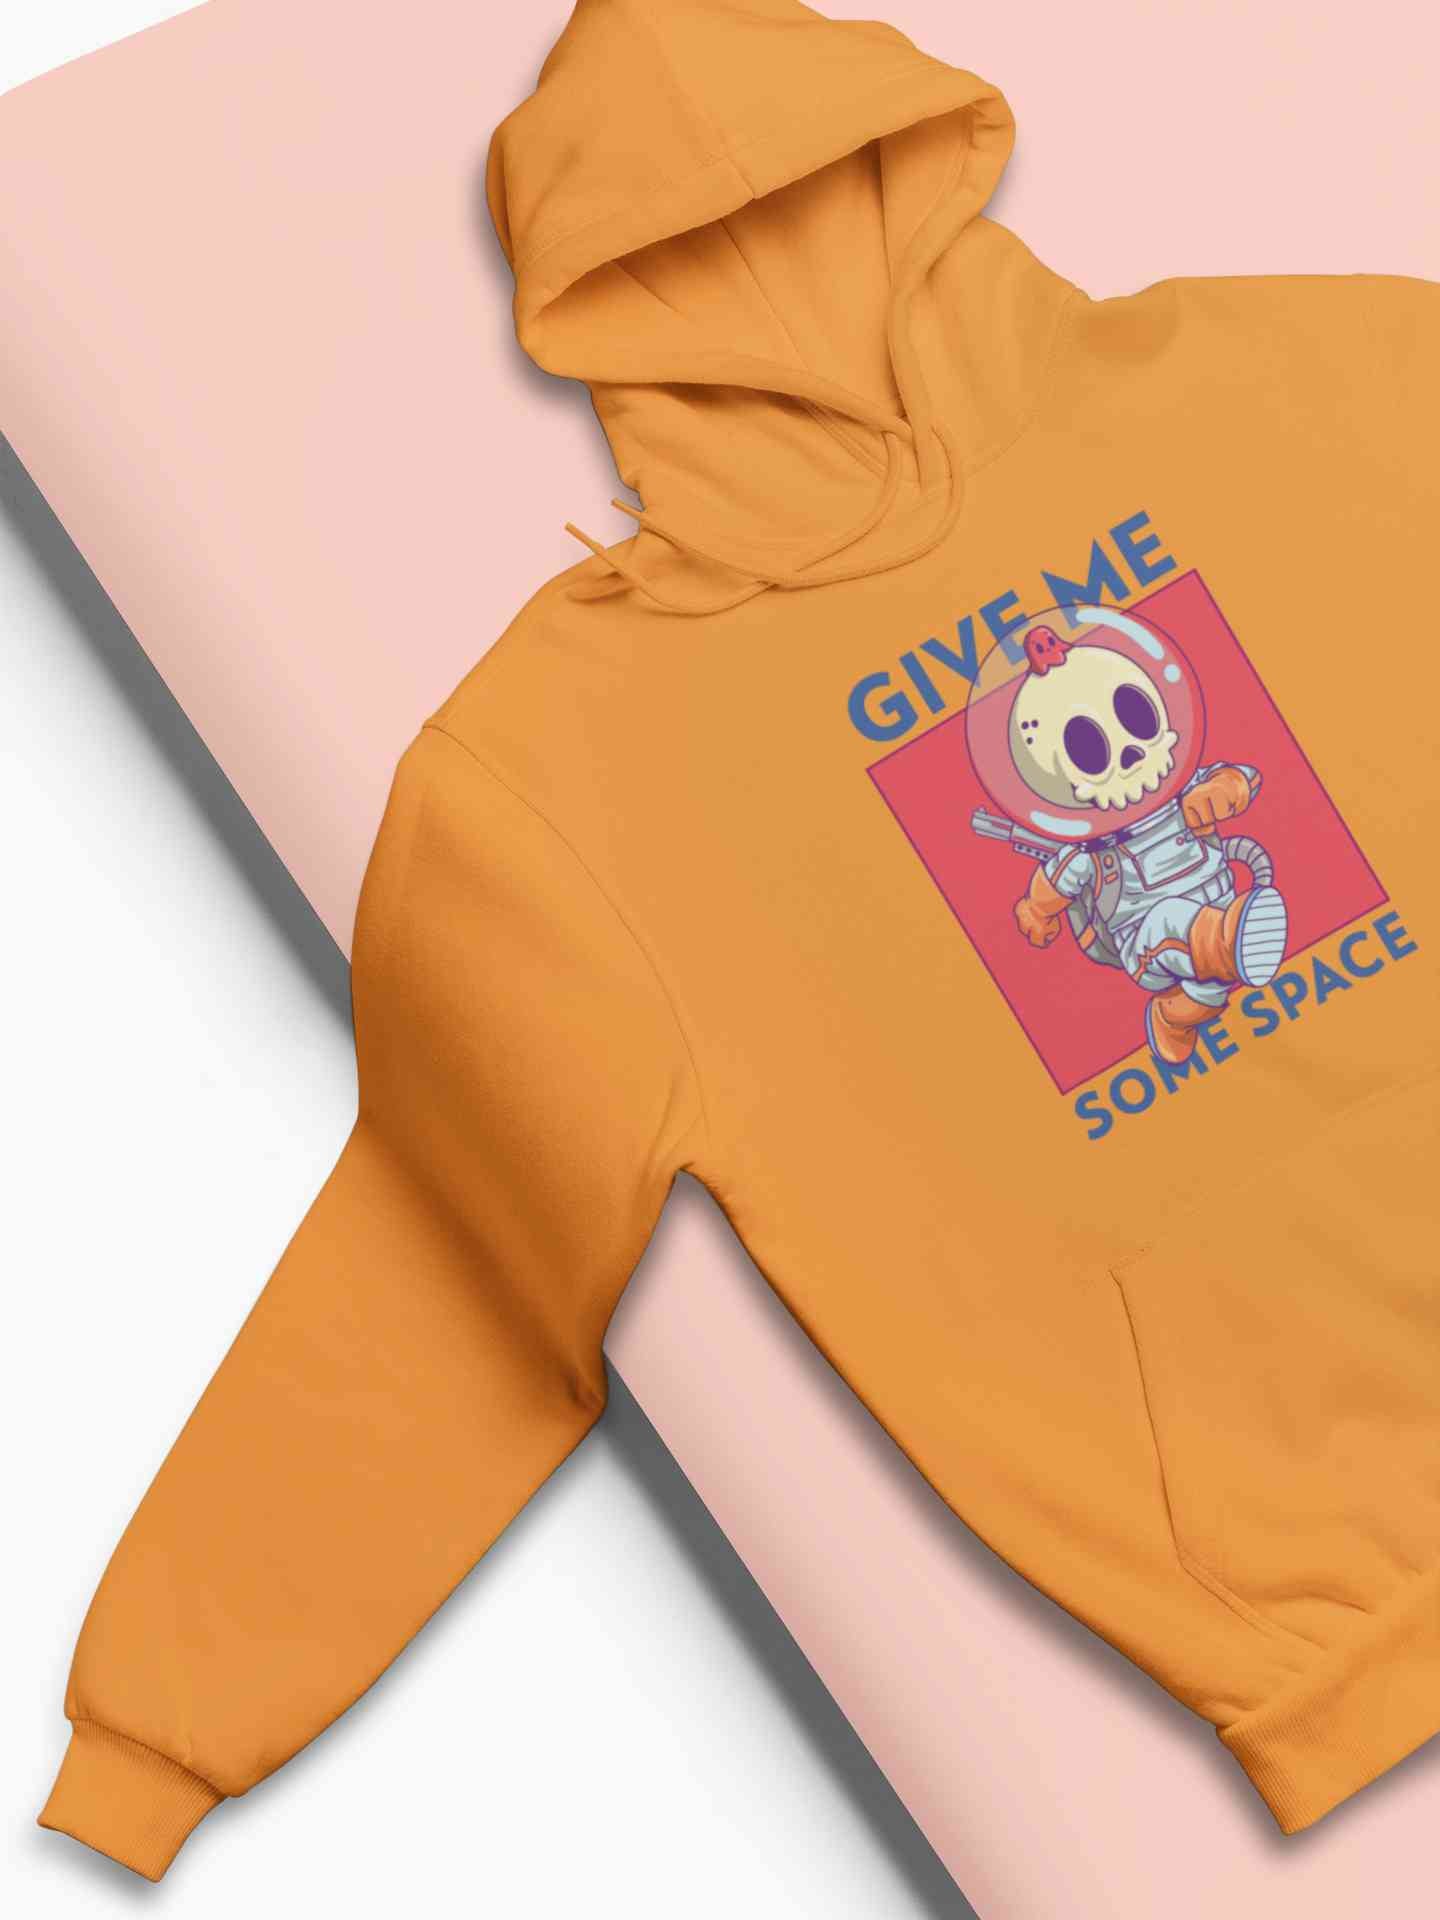 Give Me Some Space Hoodies for Women-FunkyTeesClub